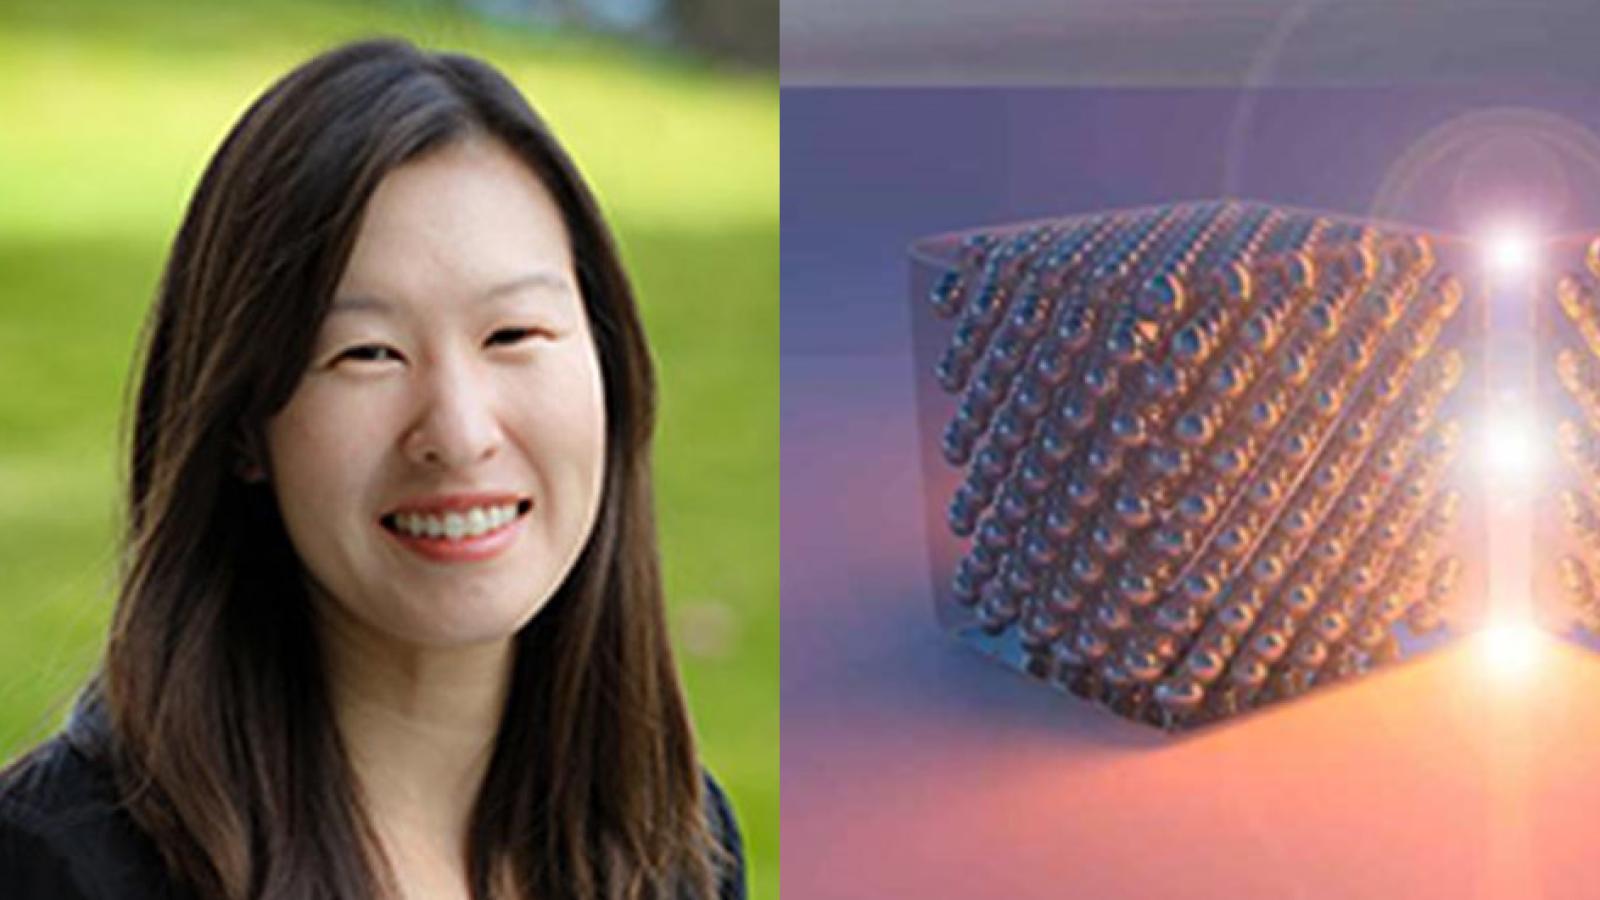 Andrea Tao, and silver nanocubes